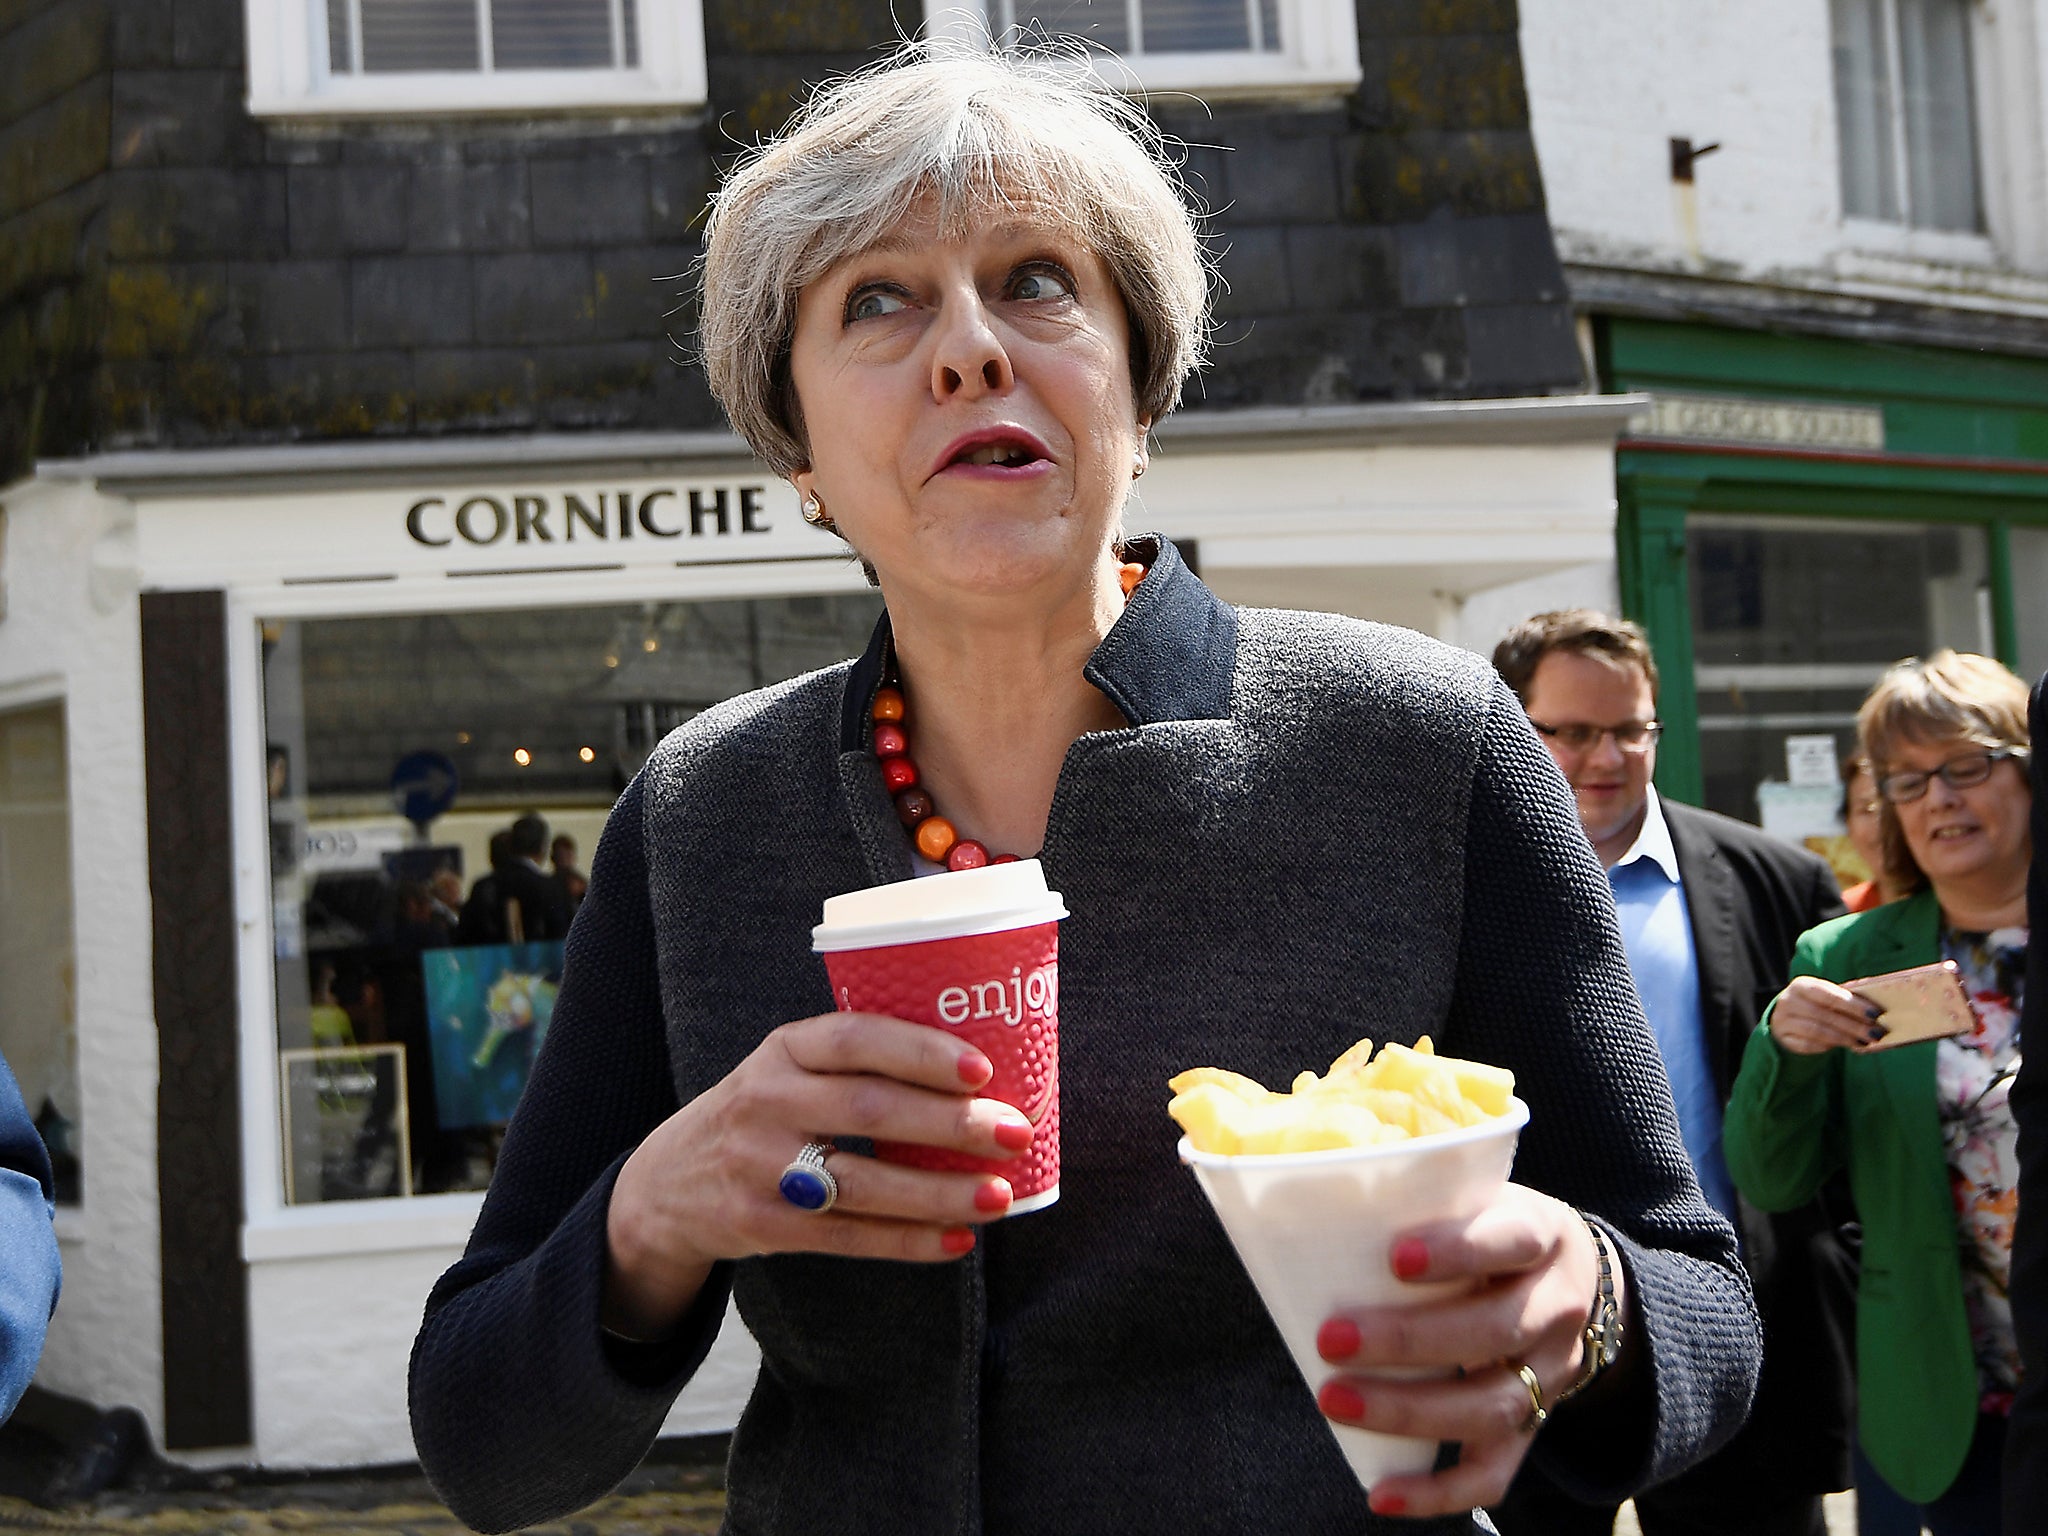 Polls suggest Theresa May is significantly more popular than her party